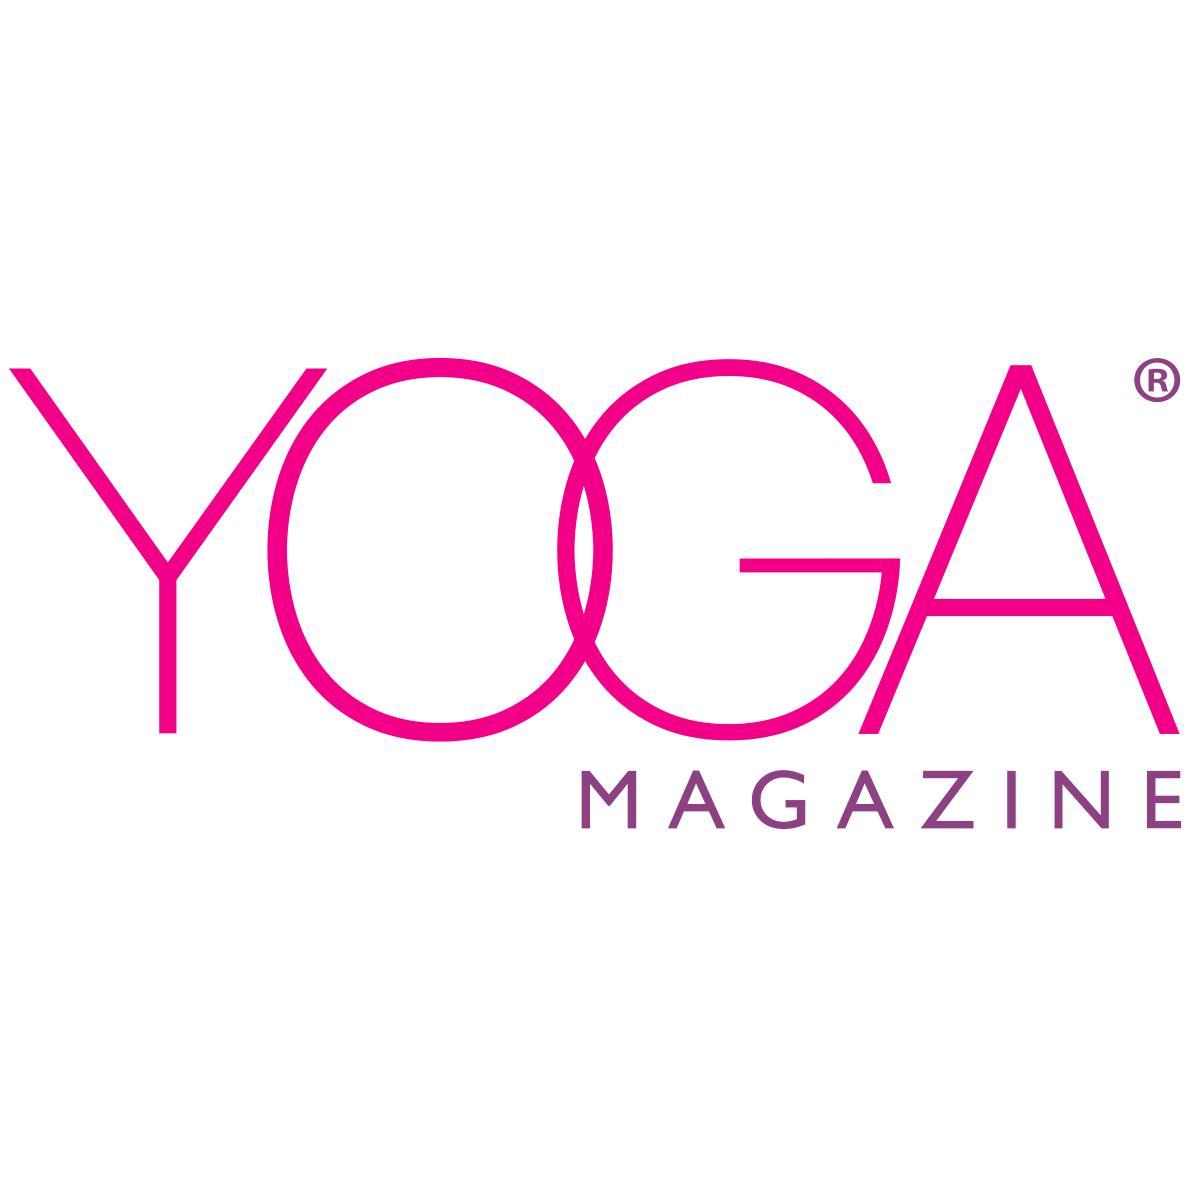 Your guide to #yoga, well-being & natural living. Packed with celebrity interviews, organic beauty/fashion & the best of yoga!